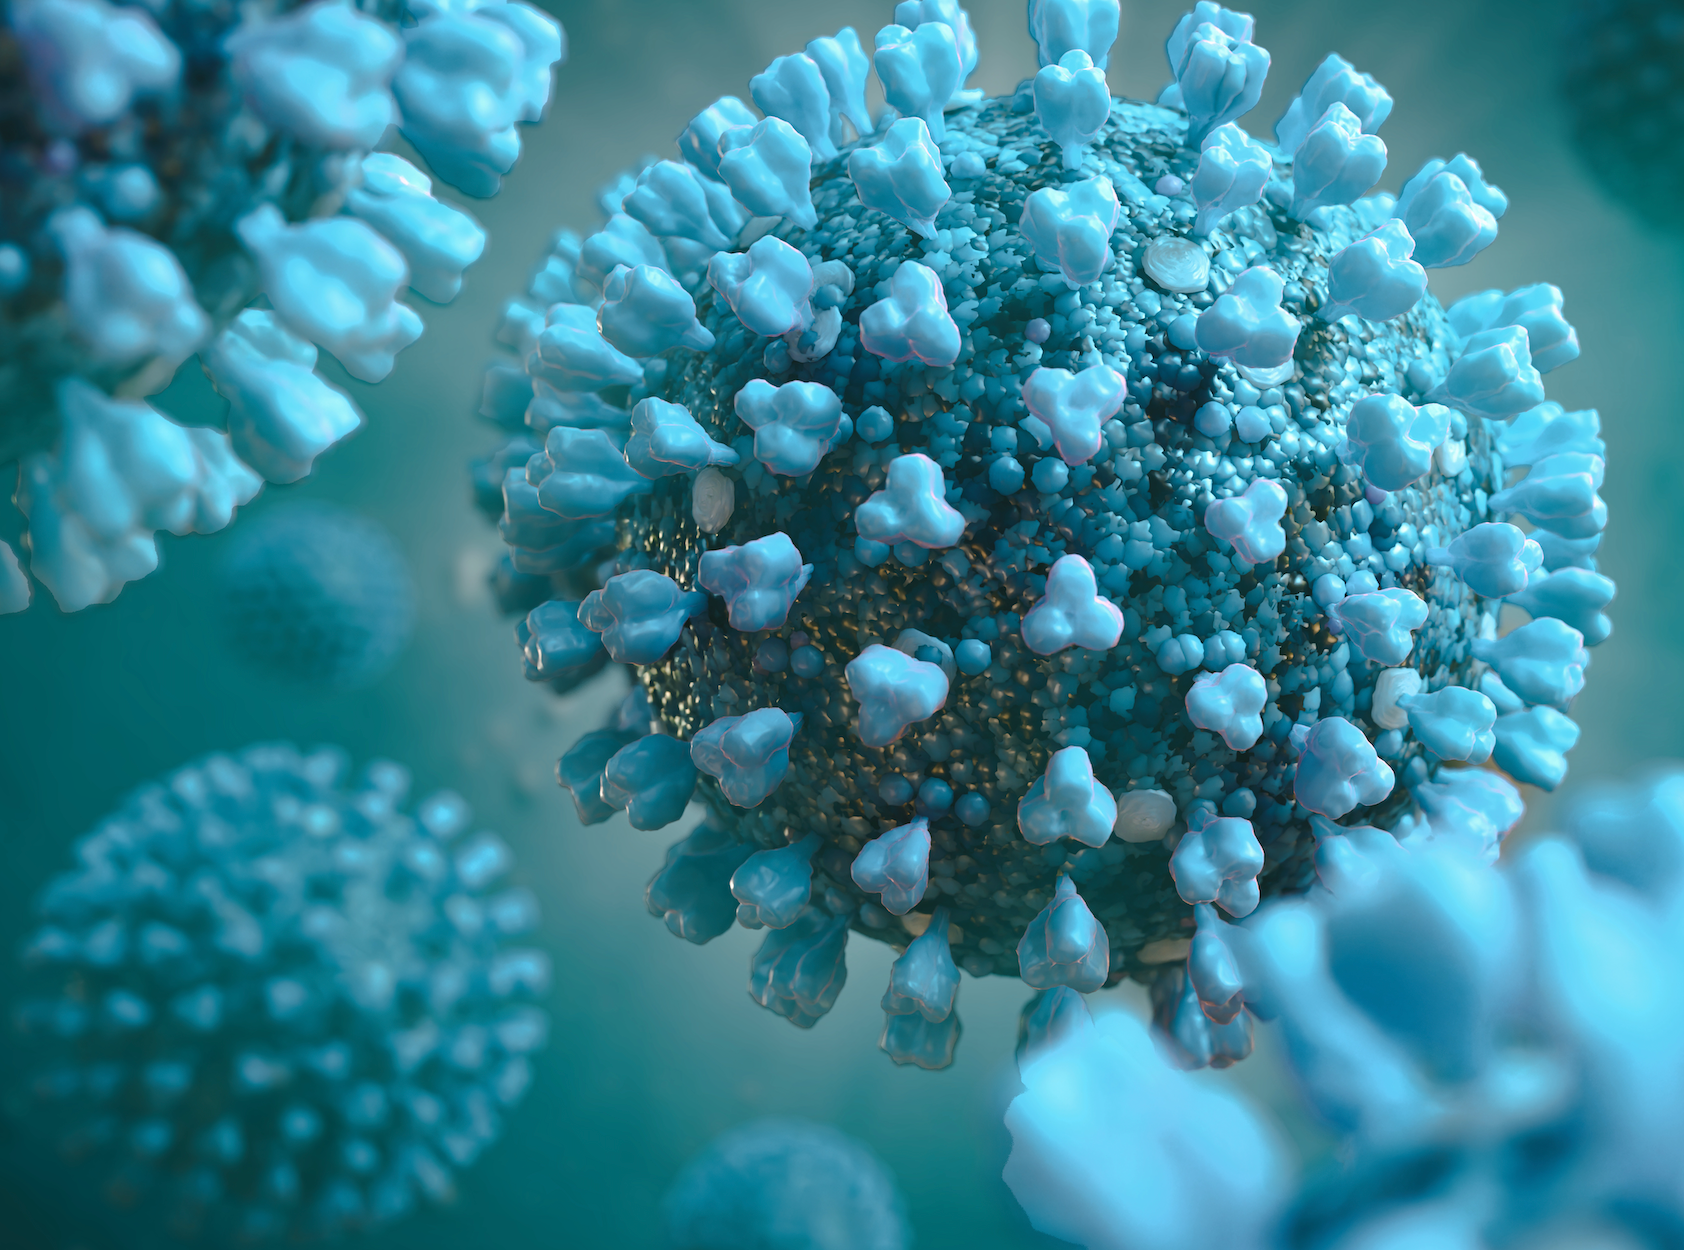 3D image of a virus